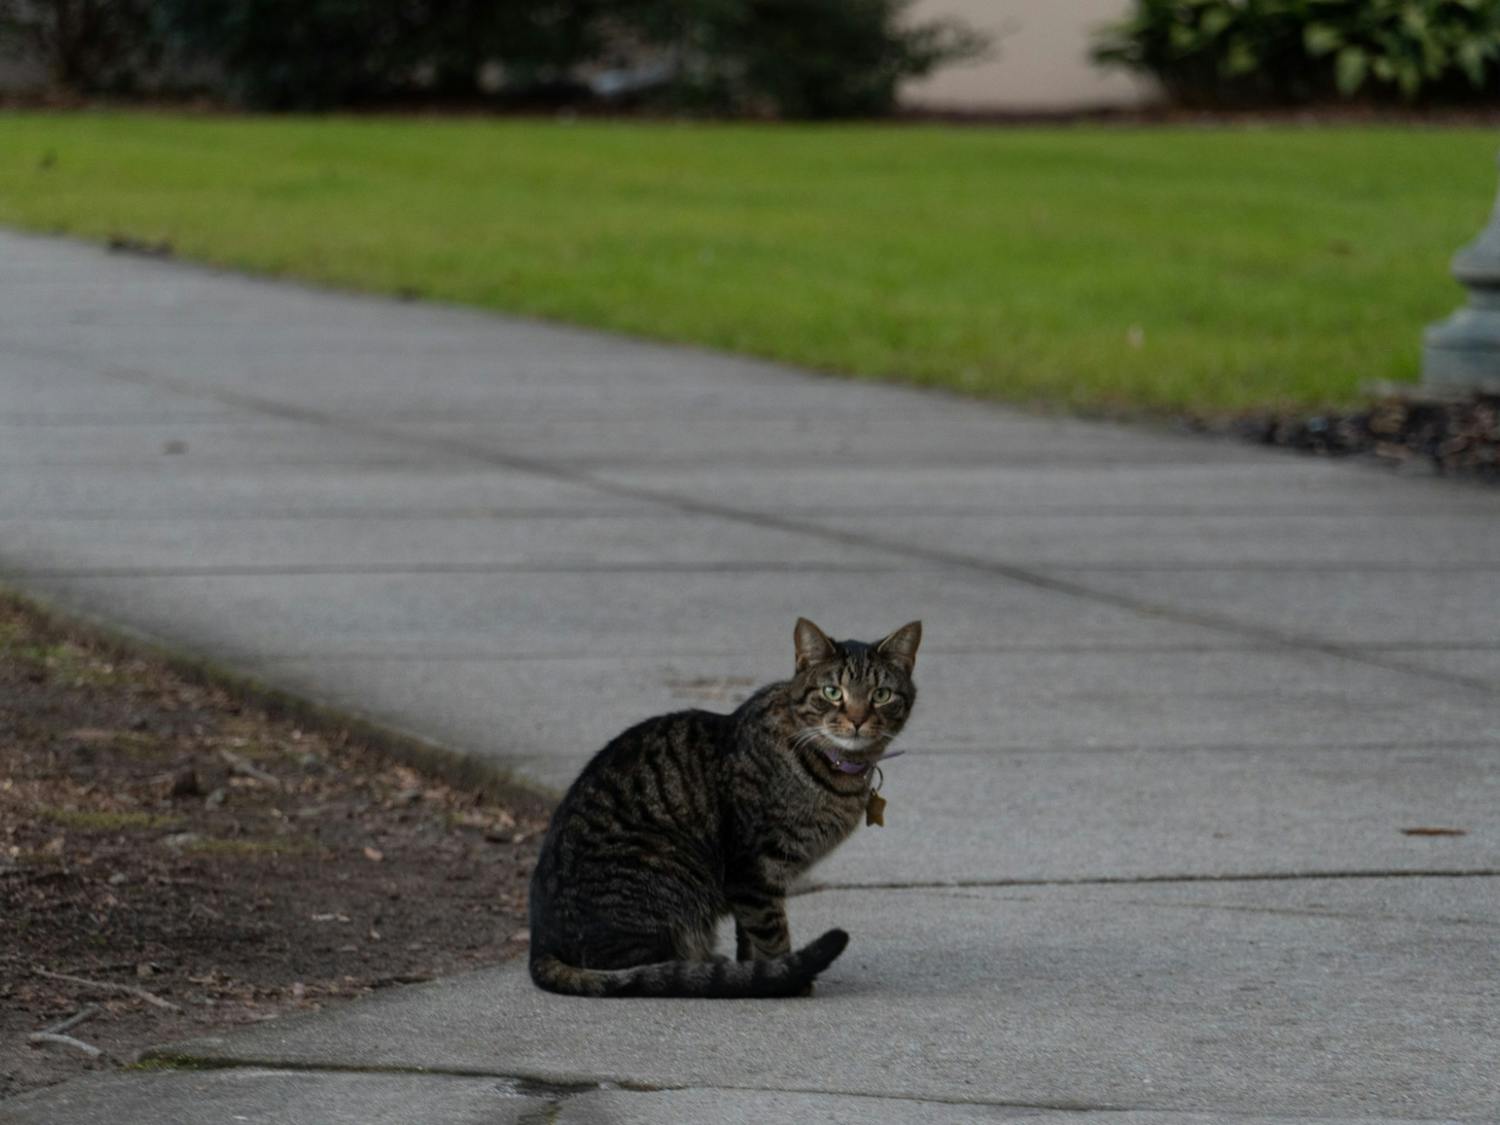 A cat sits outside on the pathway to campus on Feb. 9, 2022. The Carolina campus is home to several animals including birds, squirrels and cats